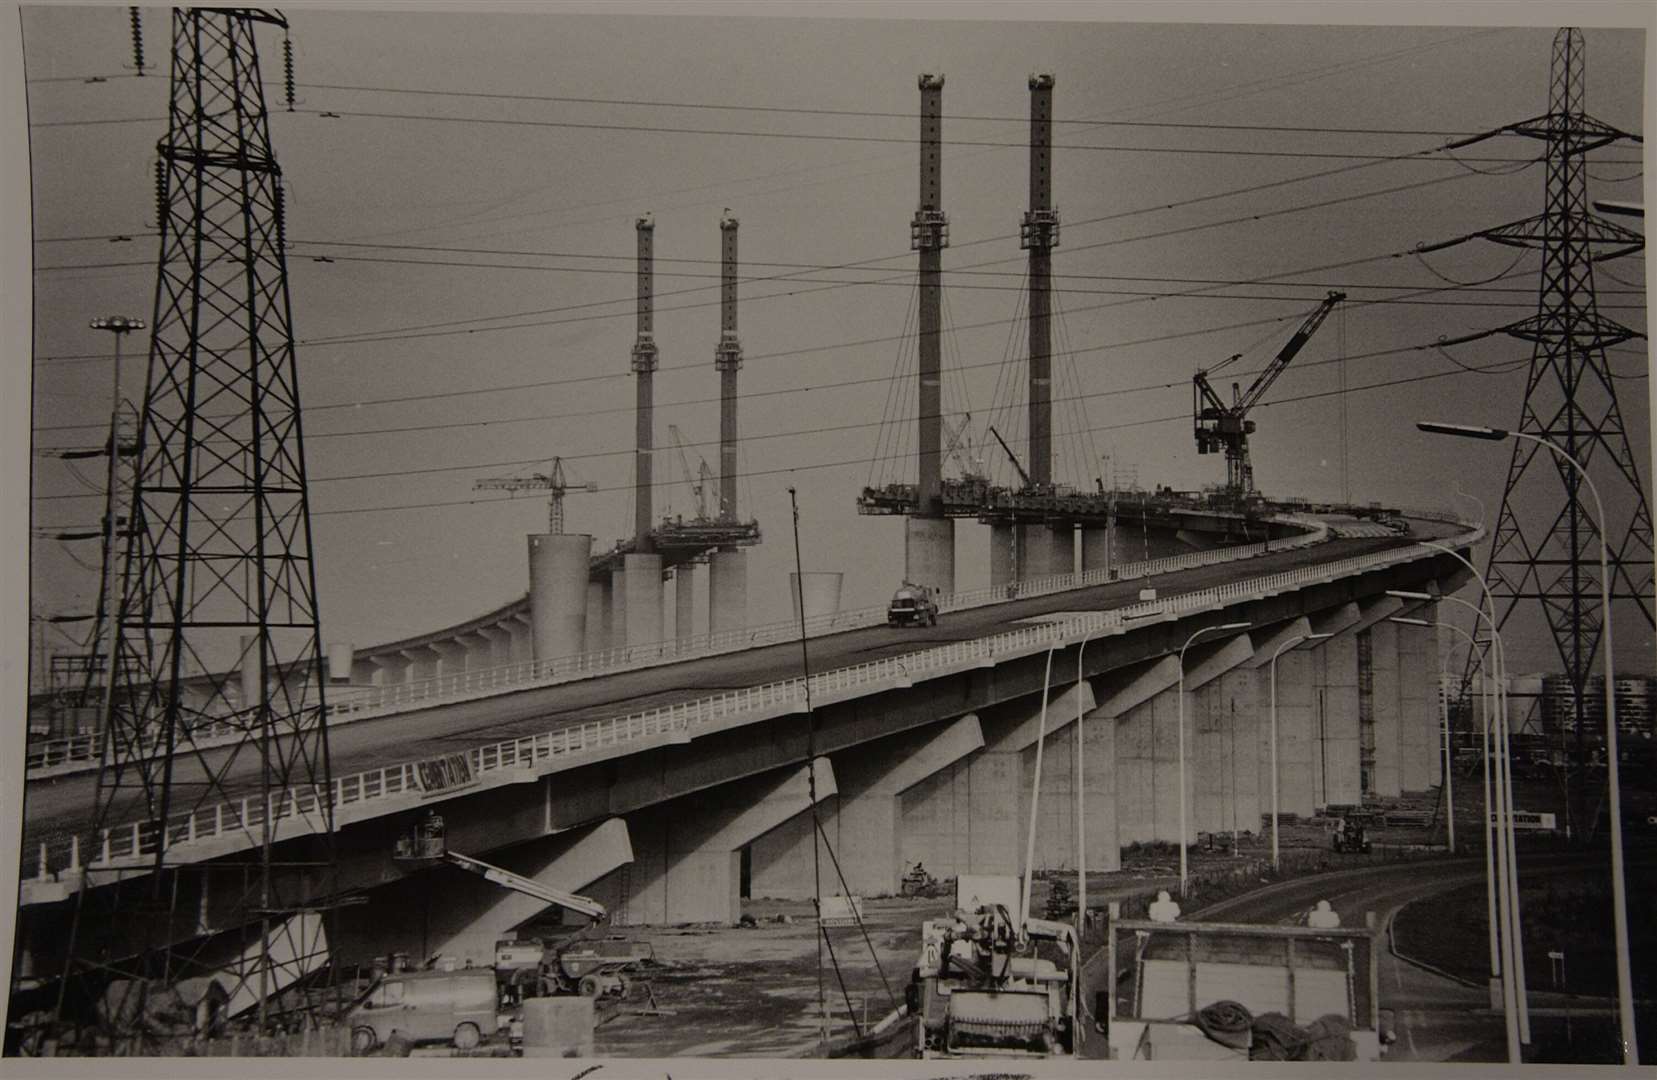 The bridge under construction at the Dartford Crossing - a year before its official opening in 1991